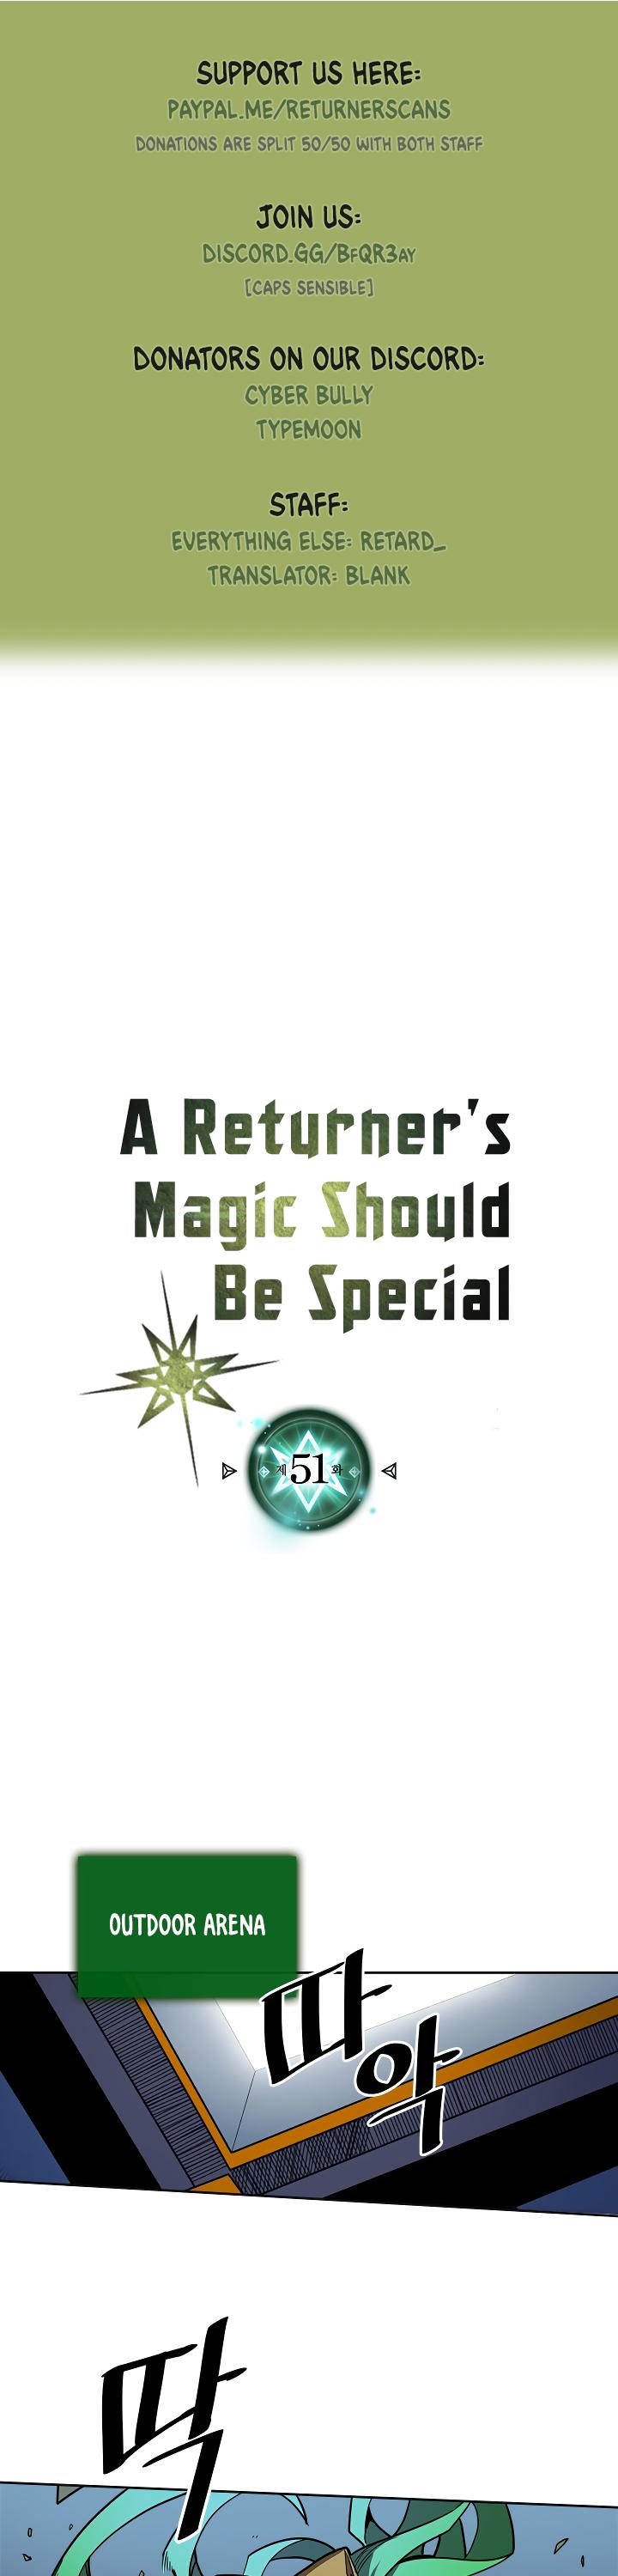 A Returner's Magic Should Be Special - Page 1